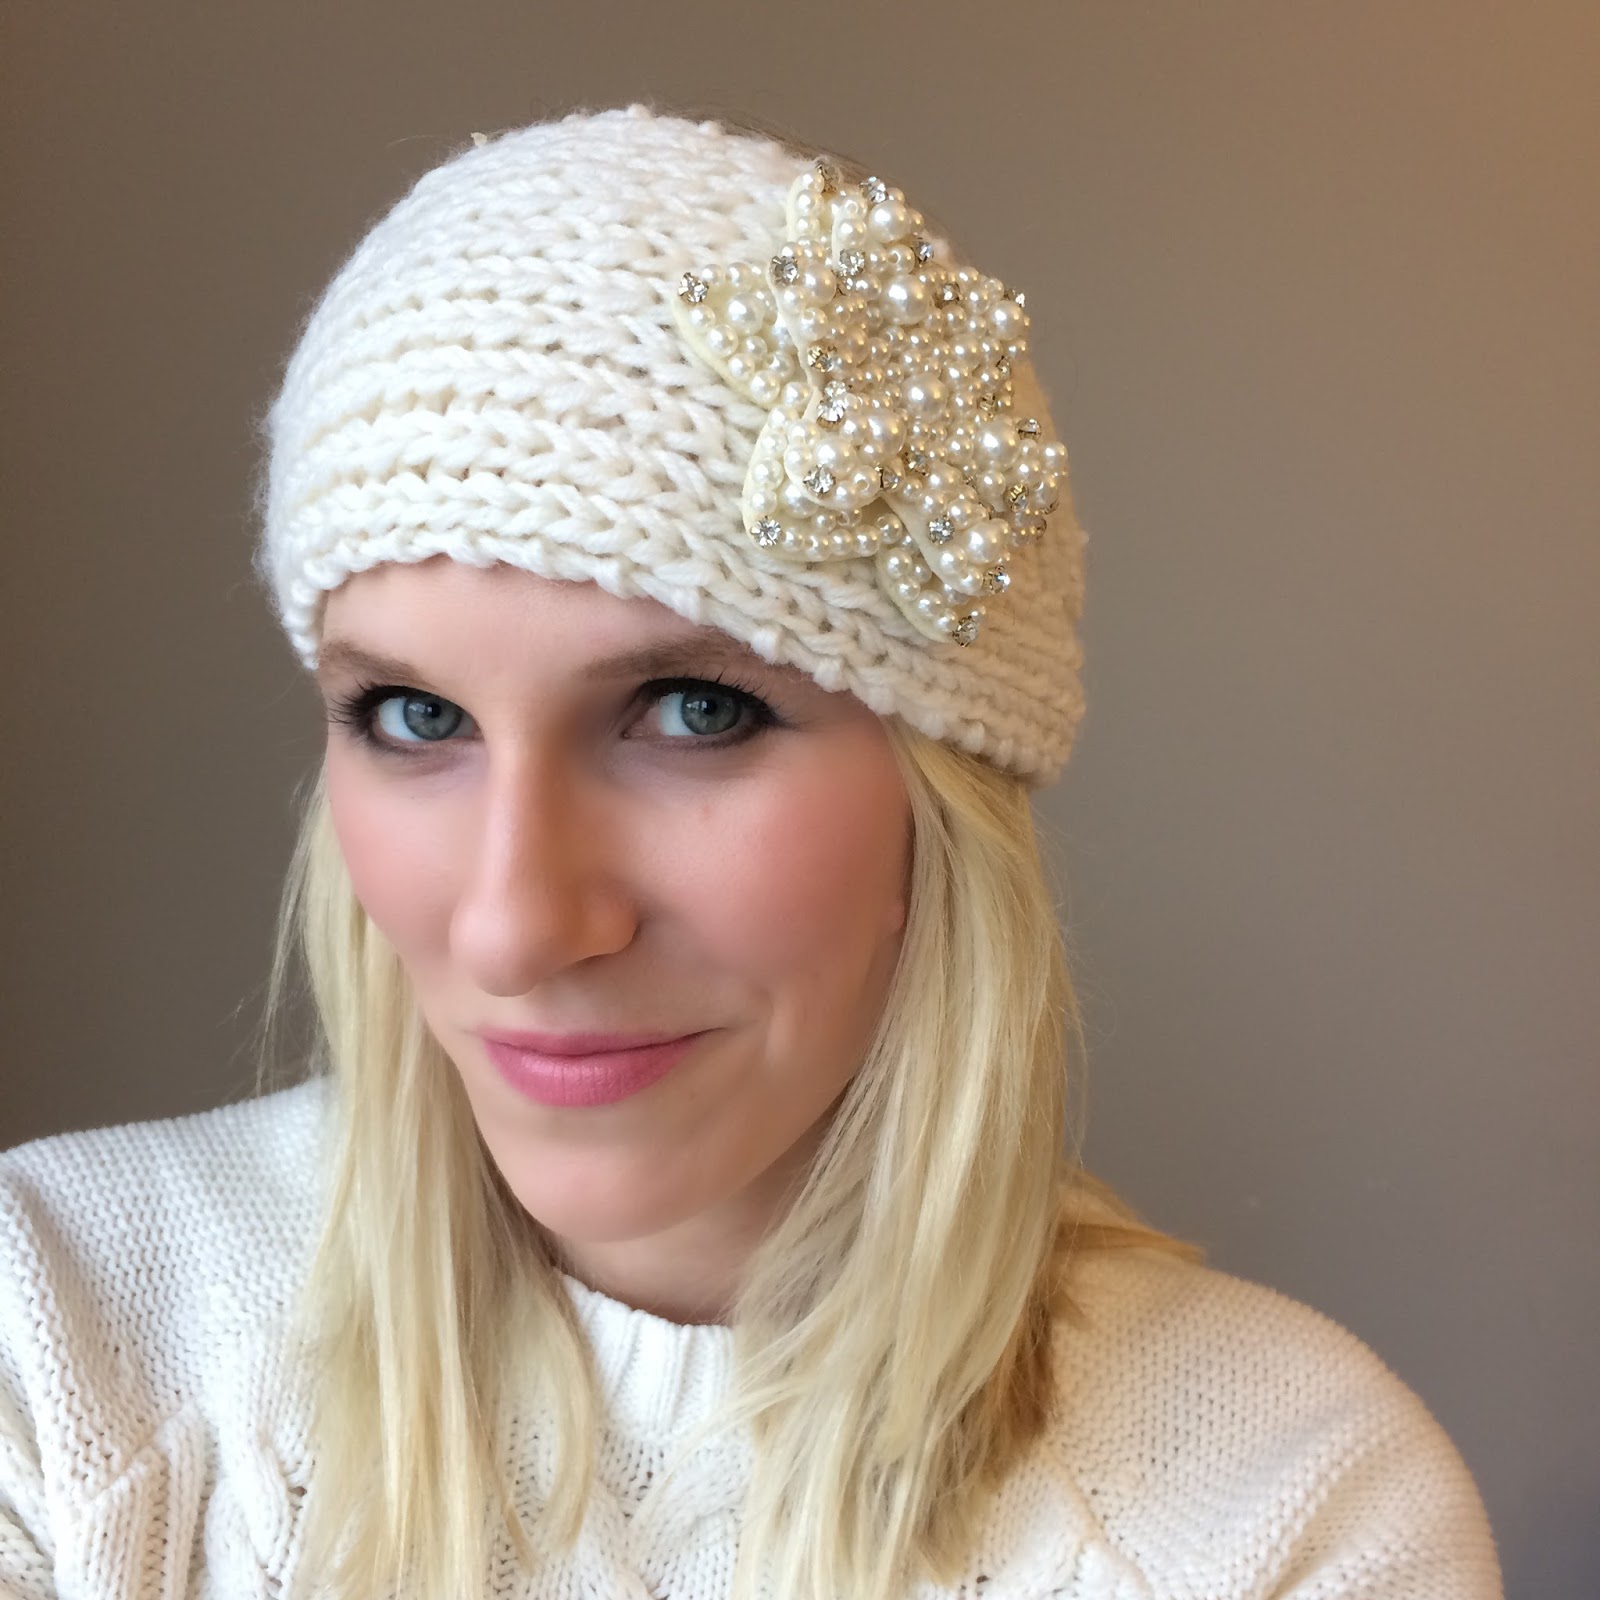 Stylish Ways to Keep Your Head Warm This Winter